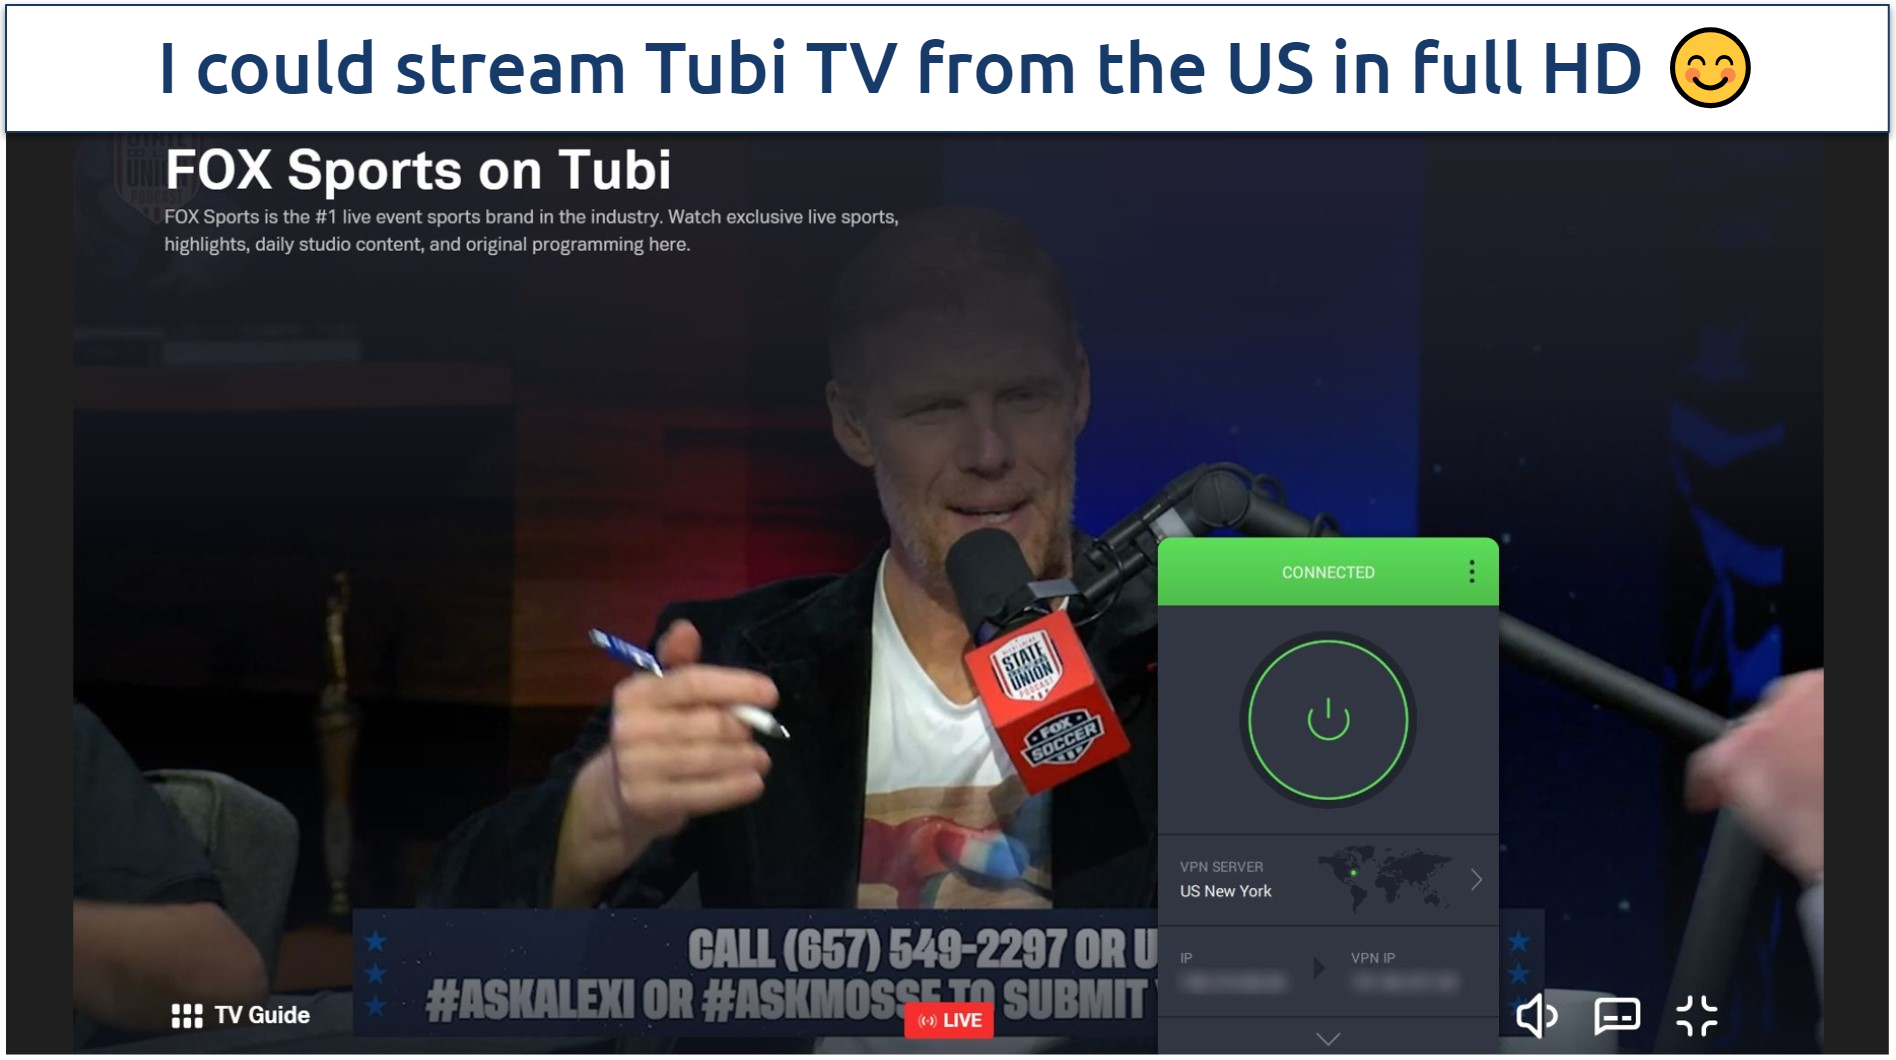 A screenshot of Tubi TV live FOX Sports while connected to Private Internet Access's US server